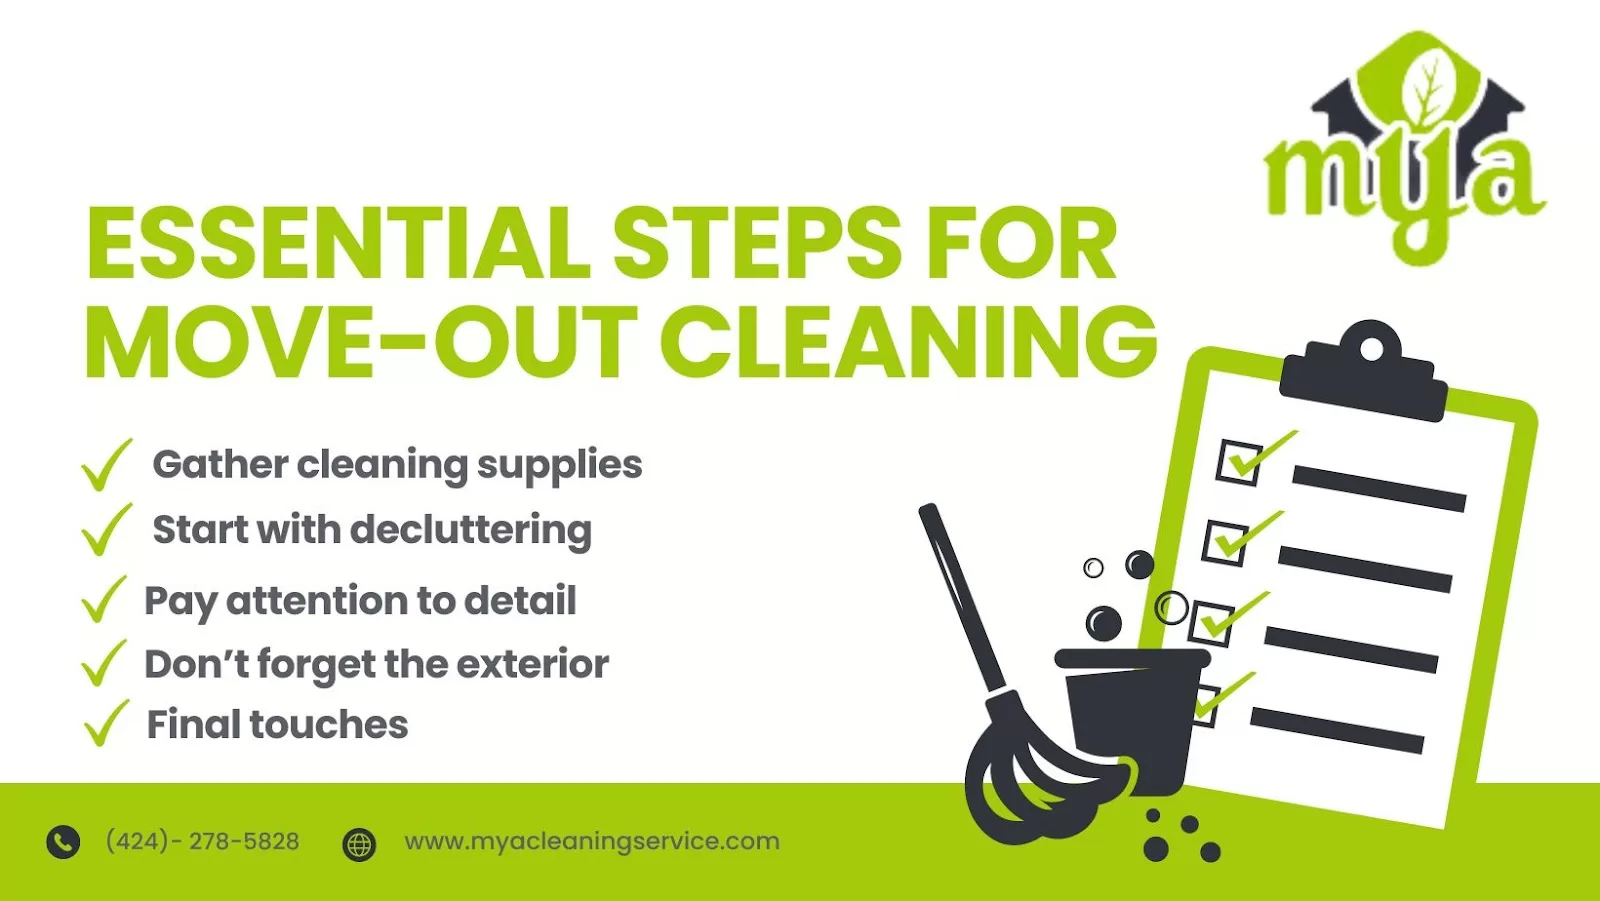 Steps for move-out cleaning